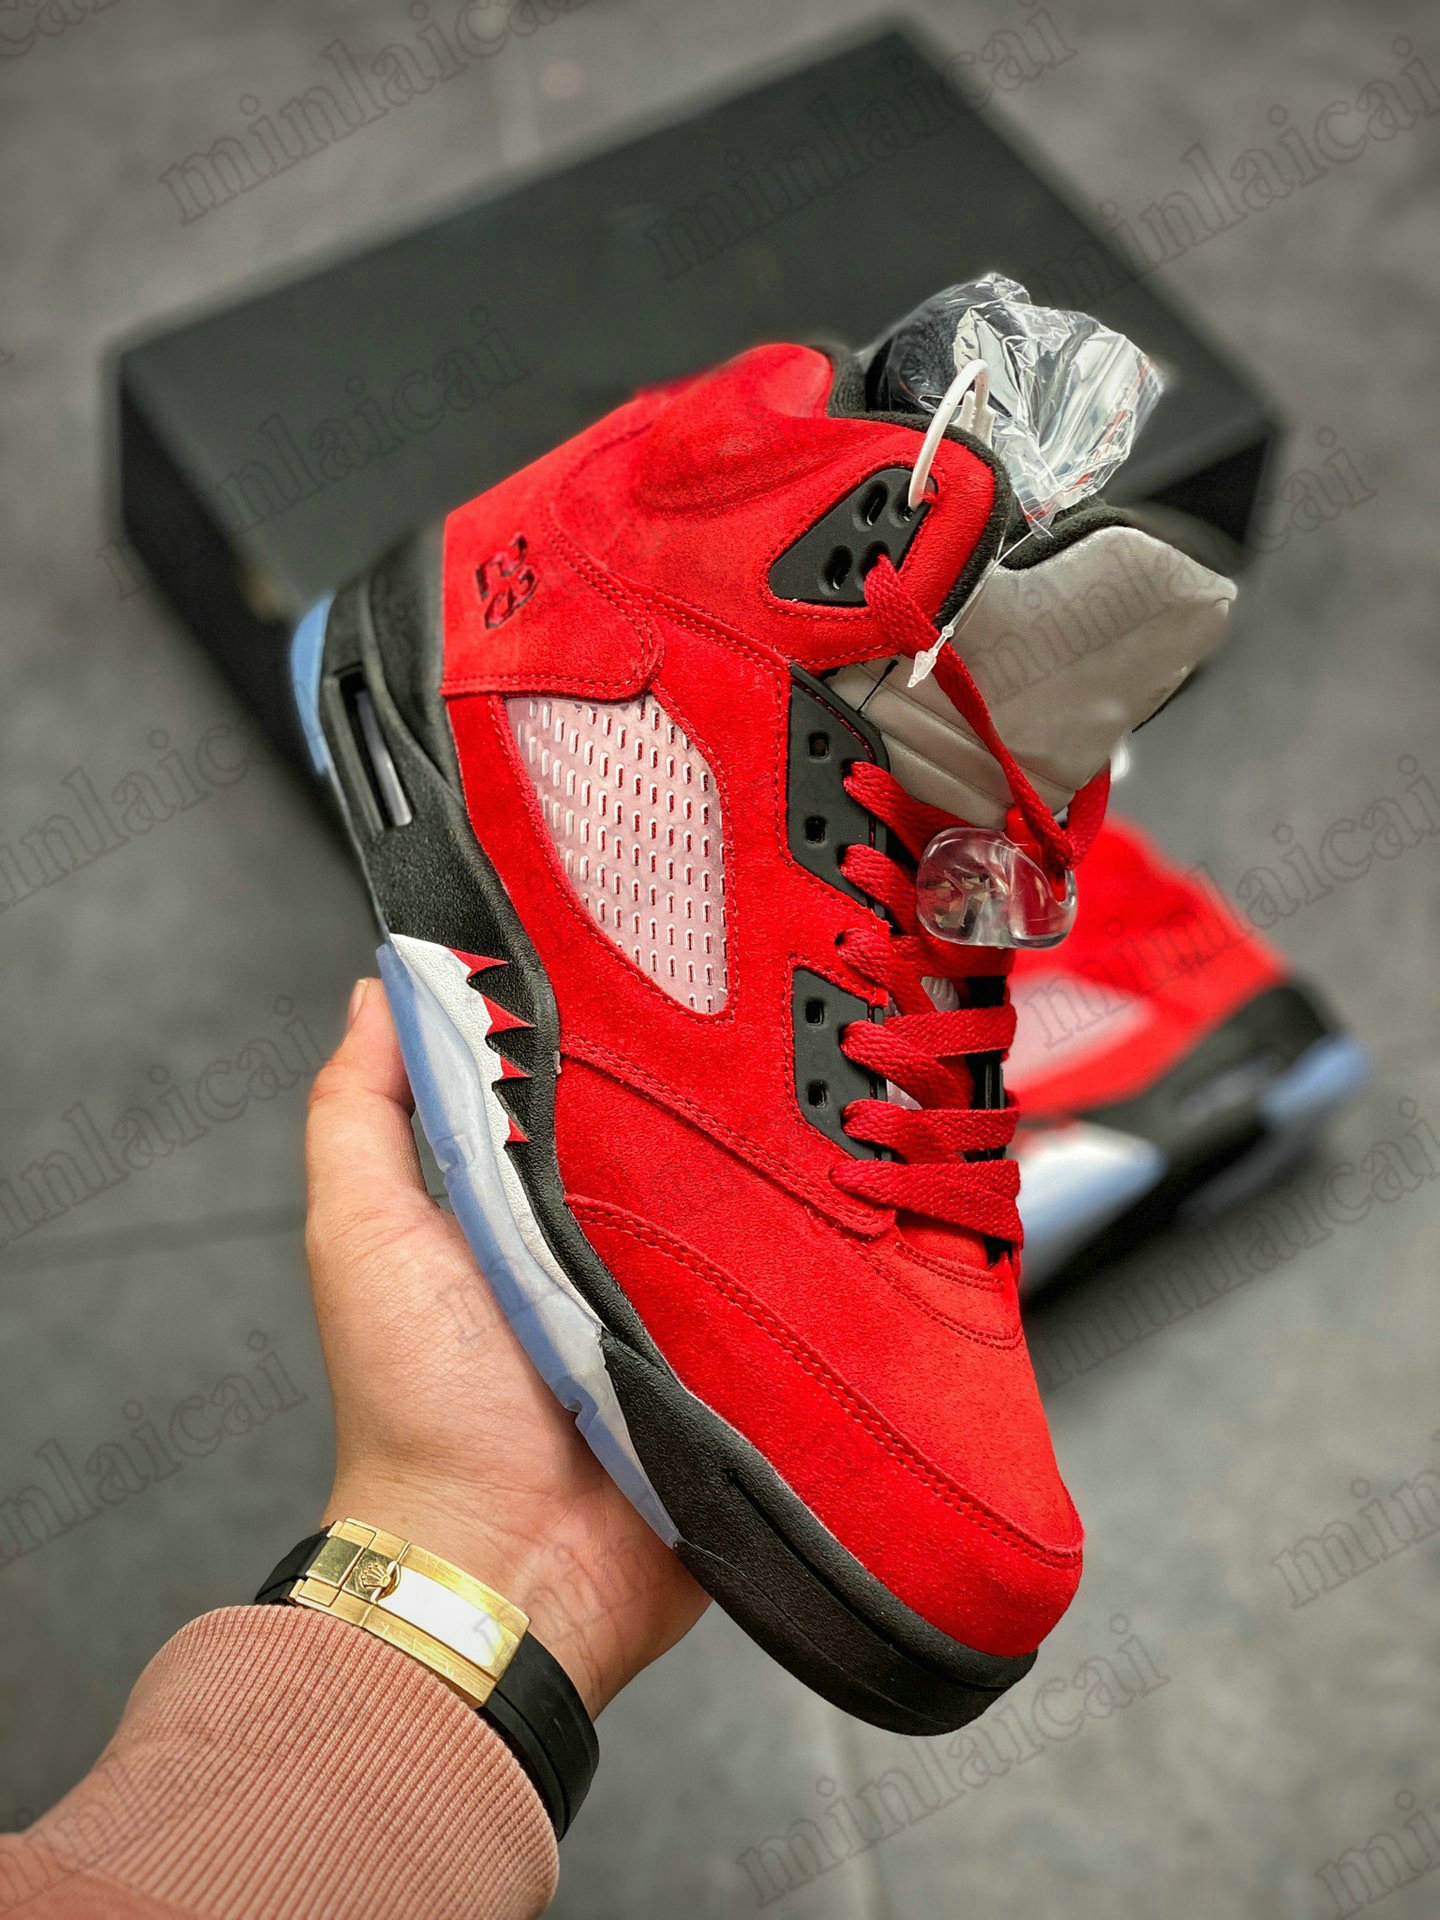 

5 Jumpman Red 5s Raging Bull 3M Reflect Basketballs Shoes Mens Off Outdoor Sport Designer Chaussures Trainer Sneakers, Customize